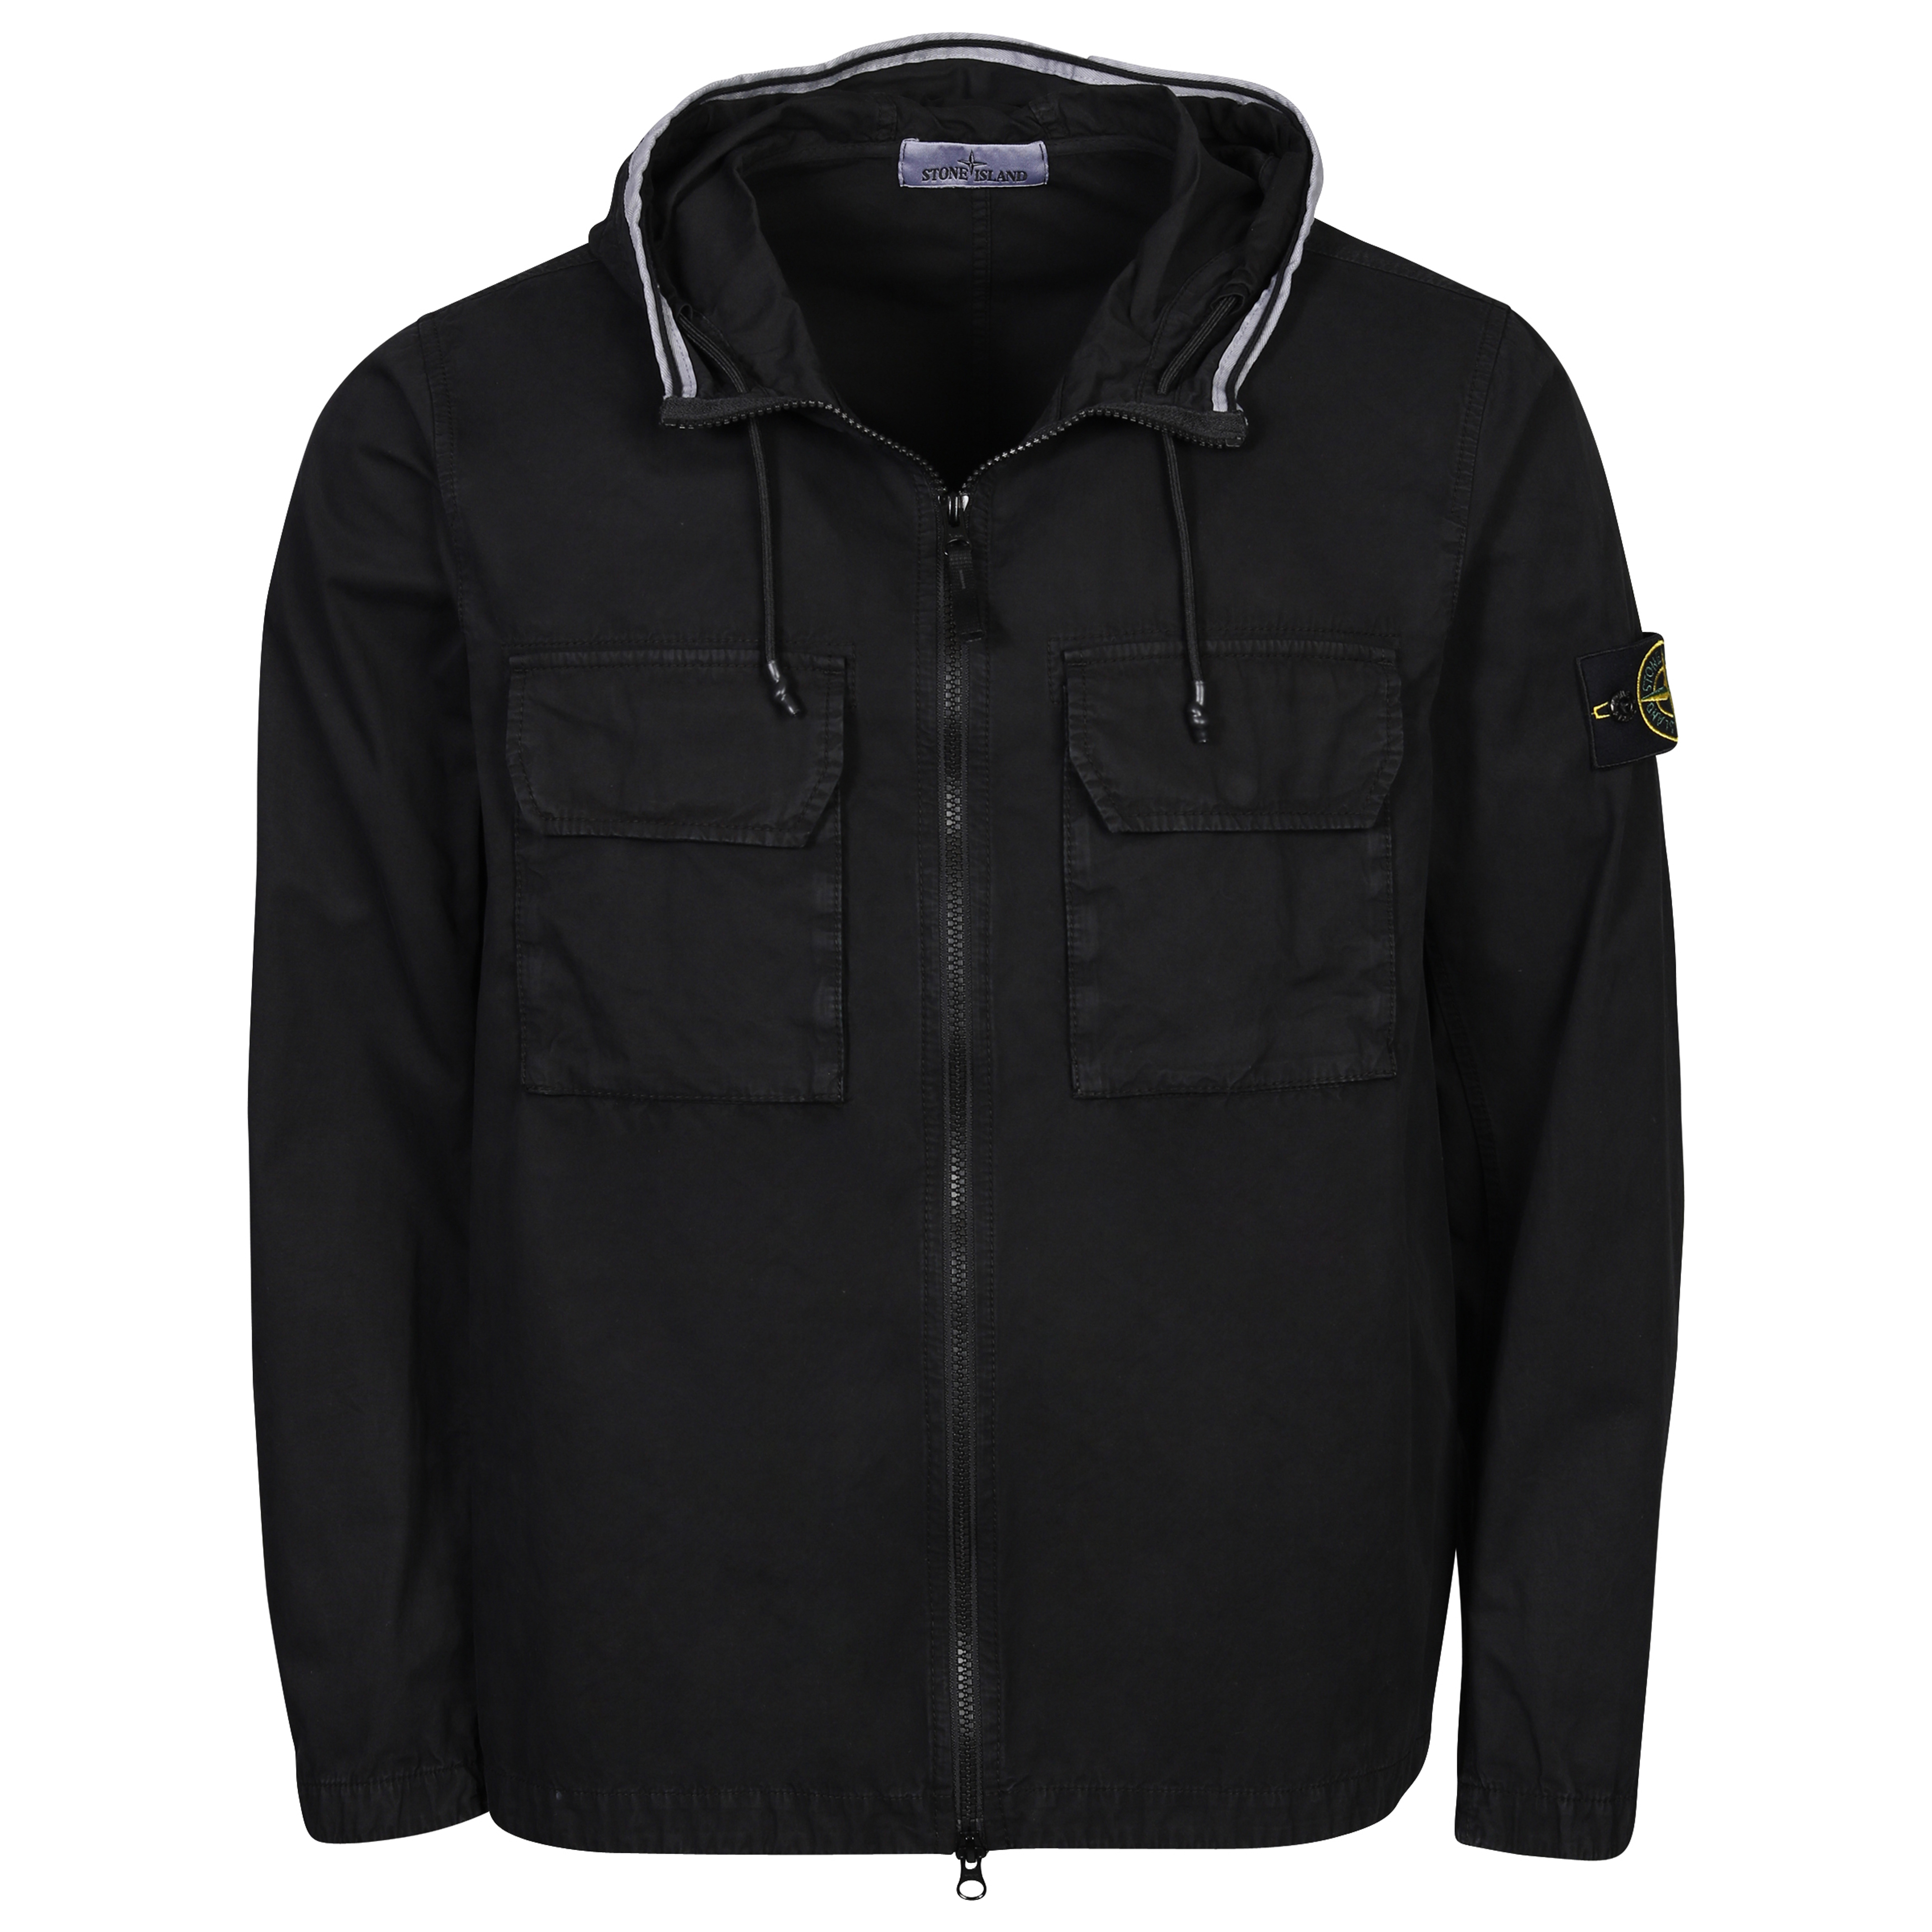 Stone Island Cotton Hooded Overshirt in Washed Black 3XL